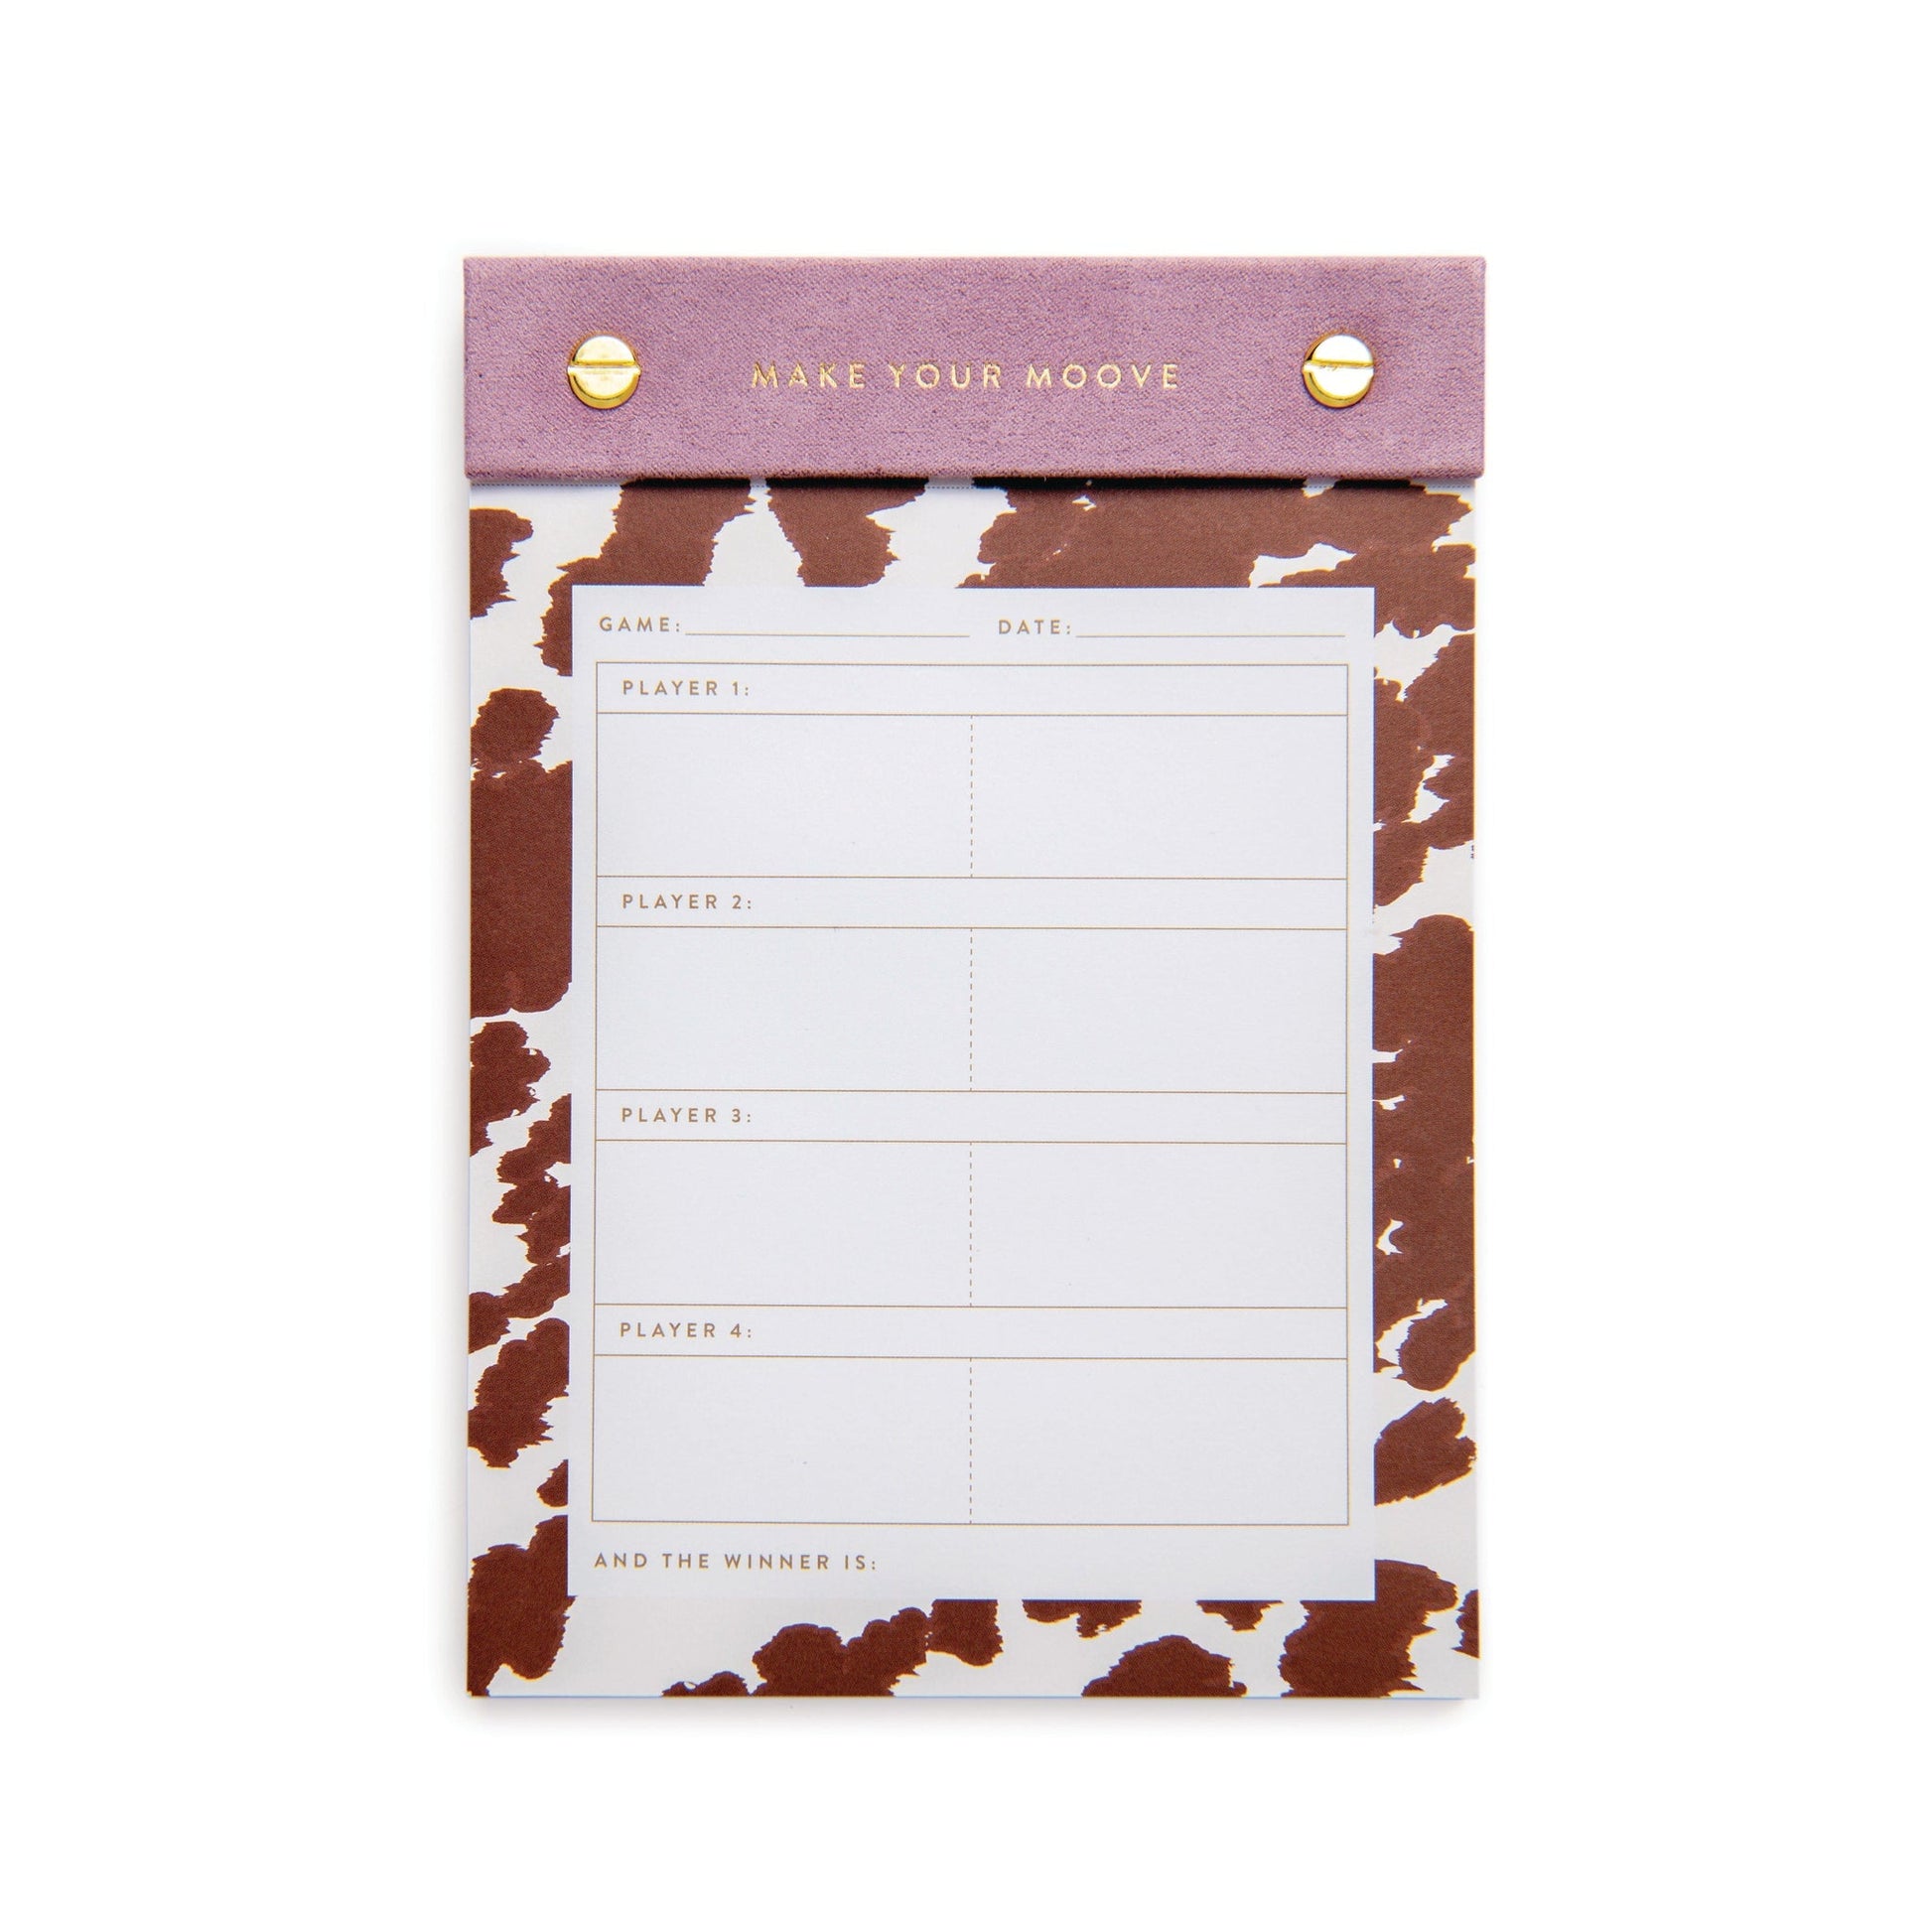 Make Your Moove - Game Score Post-Bound Pad with cowprint outline and lines for scorekeeping.